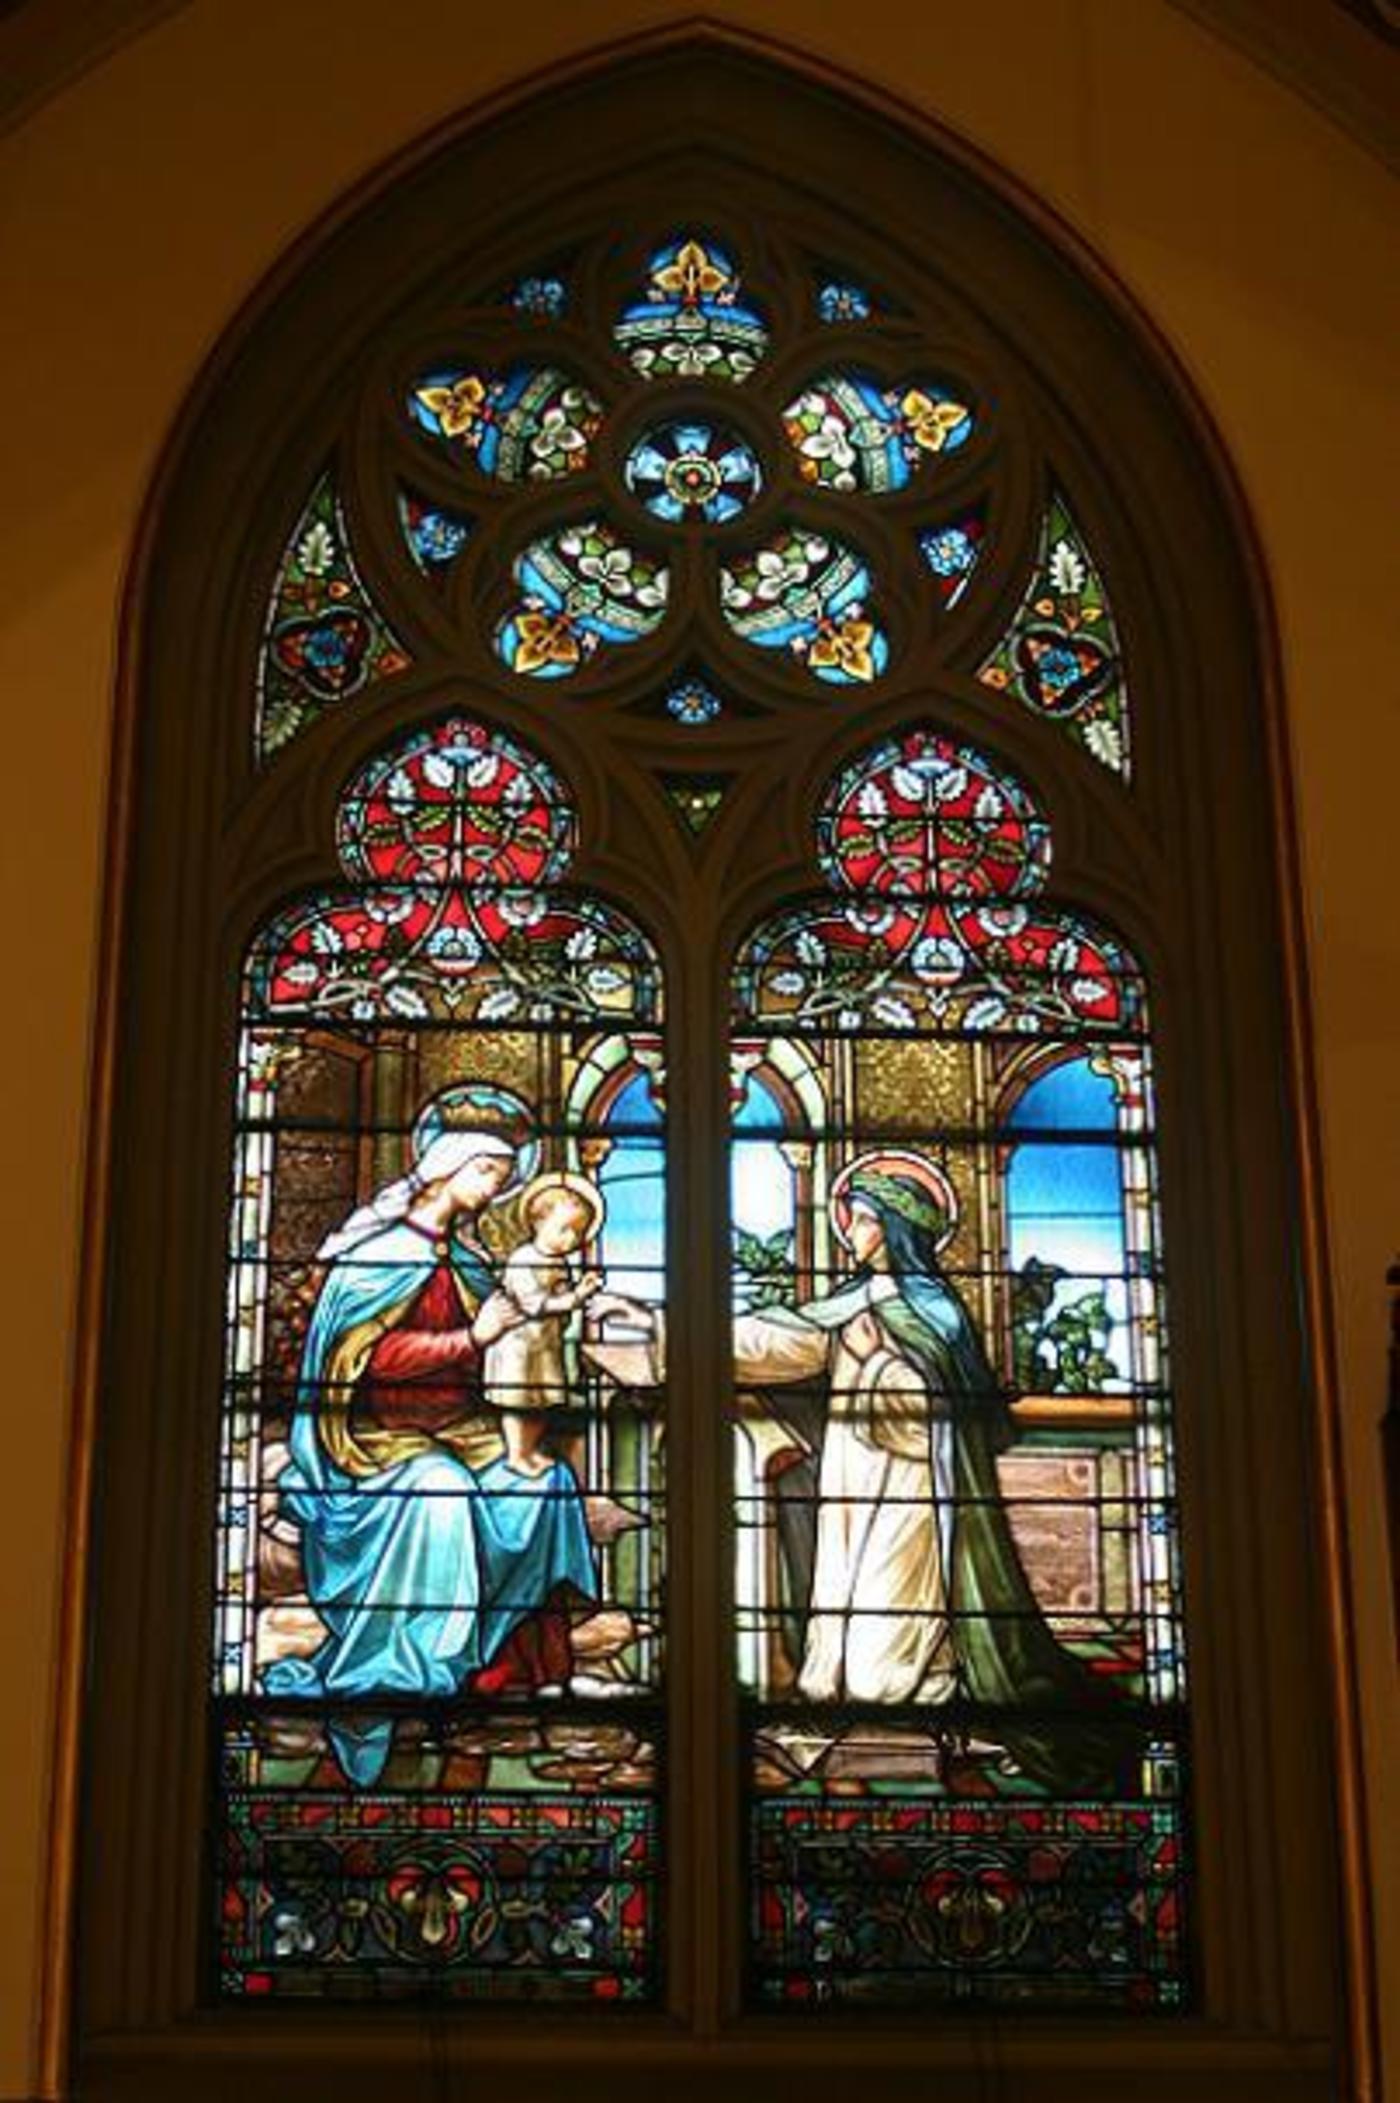 Windows 8A and 8B Blessed Virgin Mary, Infant Jesus and Saint Catherine of Sienna